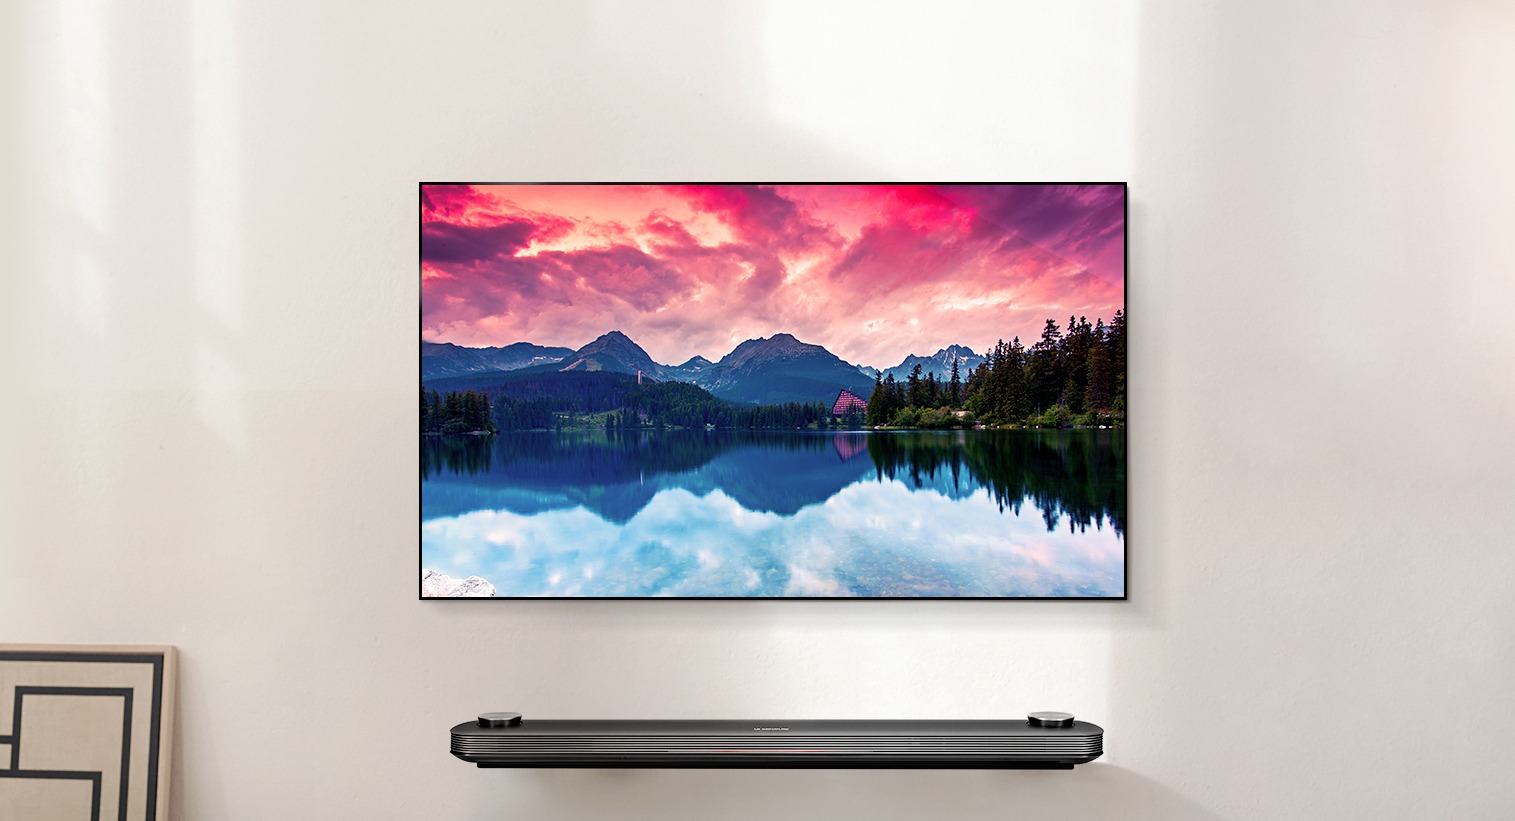 LG's Flagship W Series 4K OLED is Extremely Thin, full HDR support |  DisplayLag